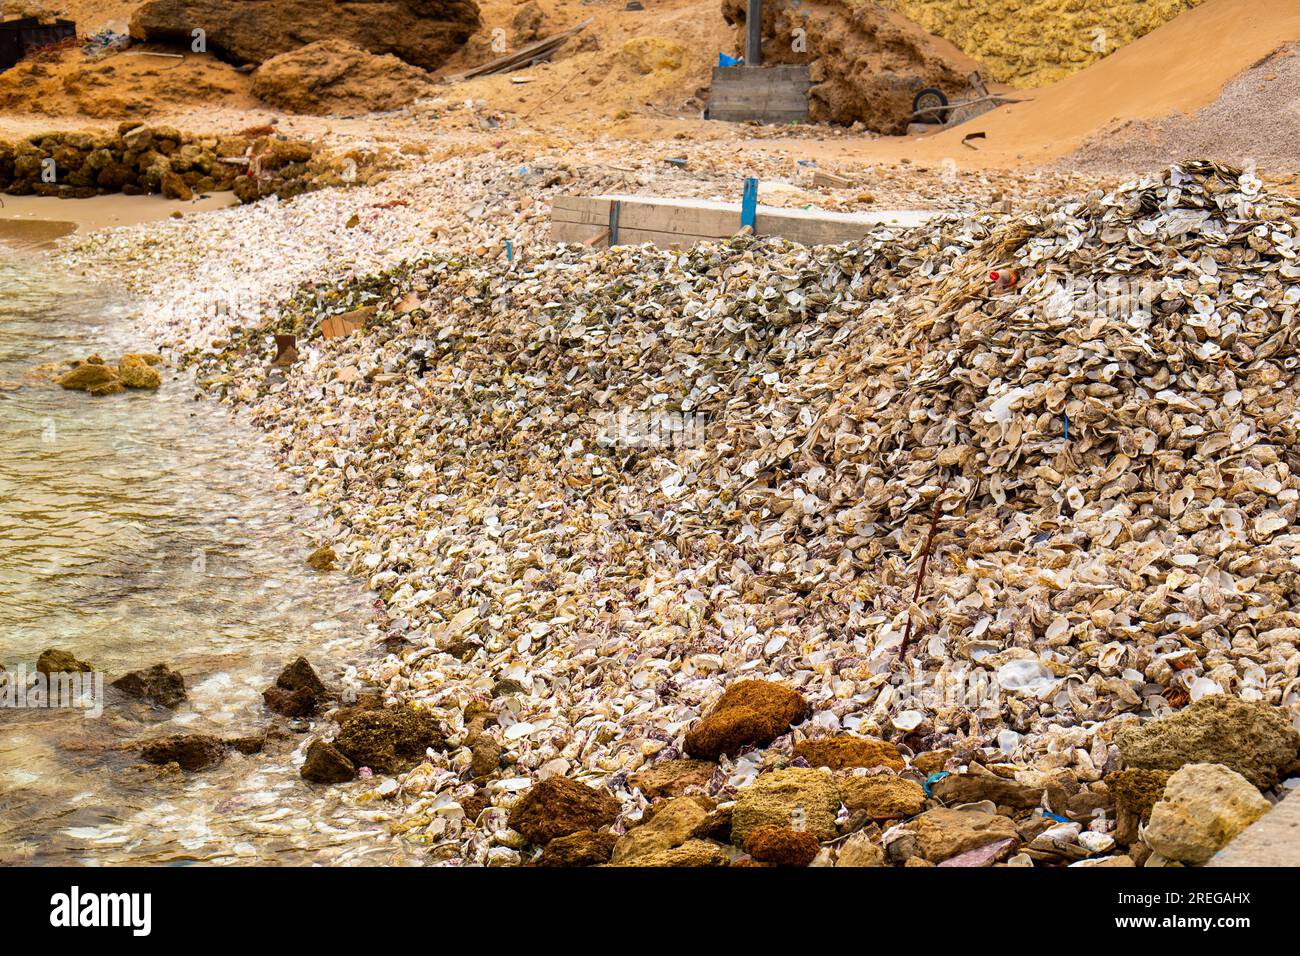 Oyster waste at the edge of a beach in Dakhla Stock Photo